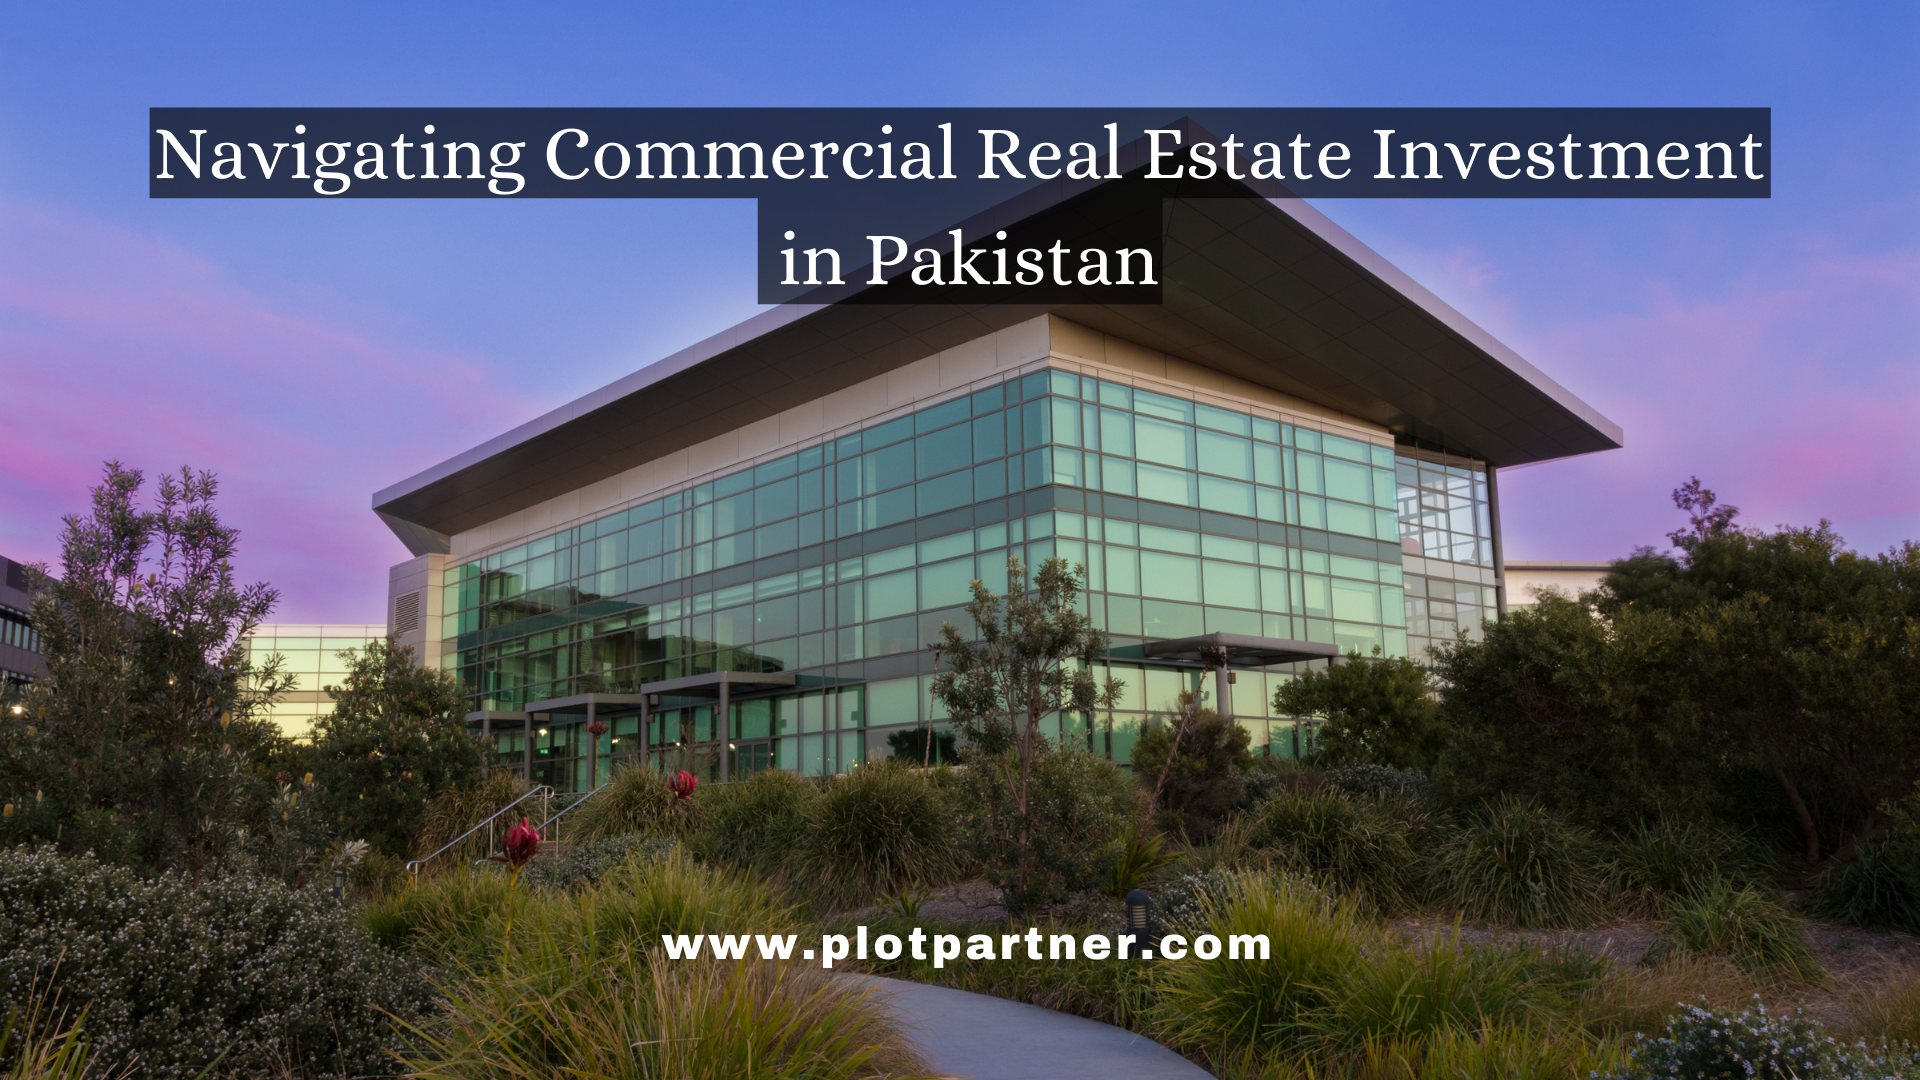 Beyond Homes: Navigating Commercial Real Estate Investment in Pakistan